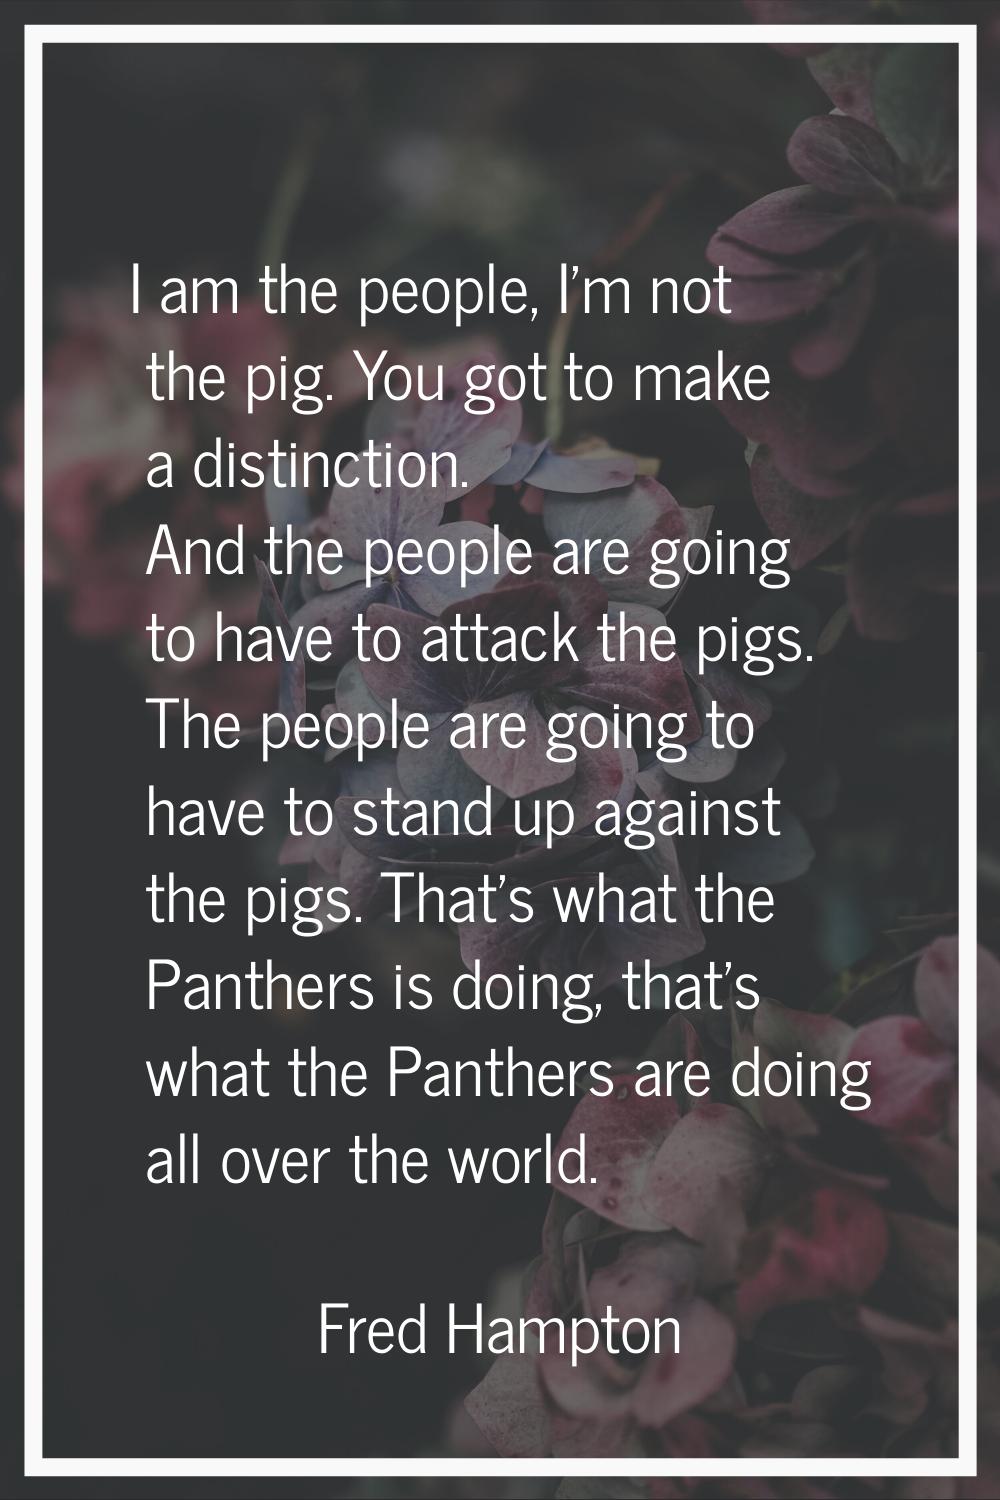 I am the people, I'm not the pig. You got to make a distinction. And the people are going to have t